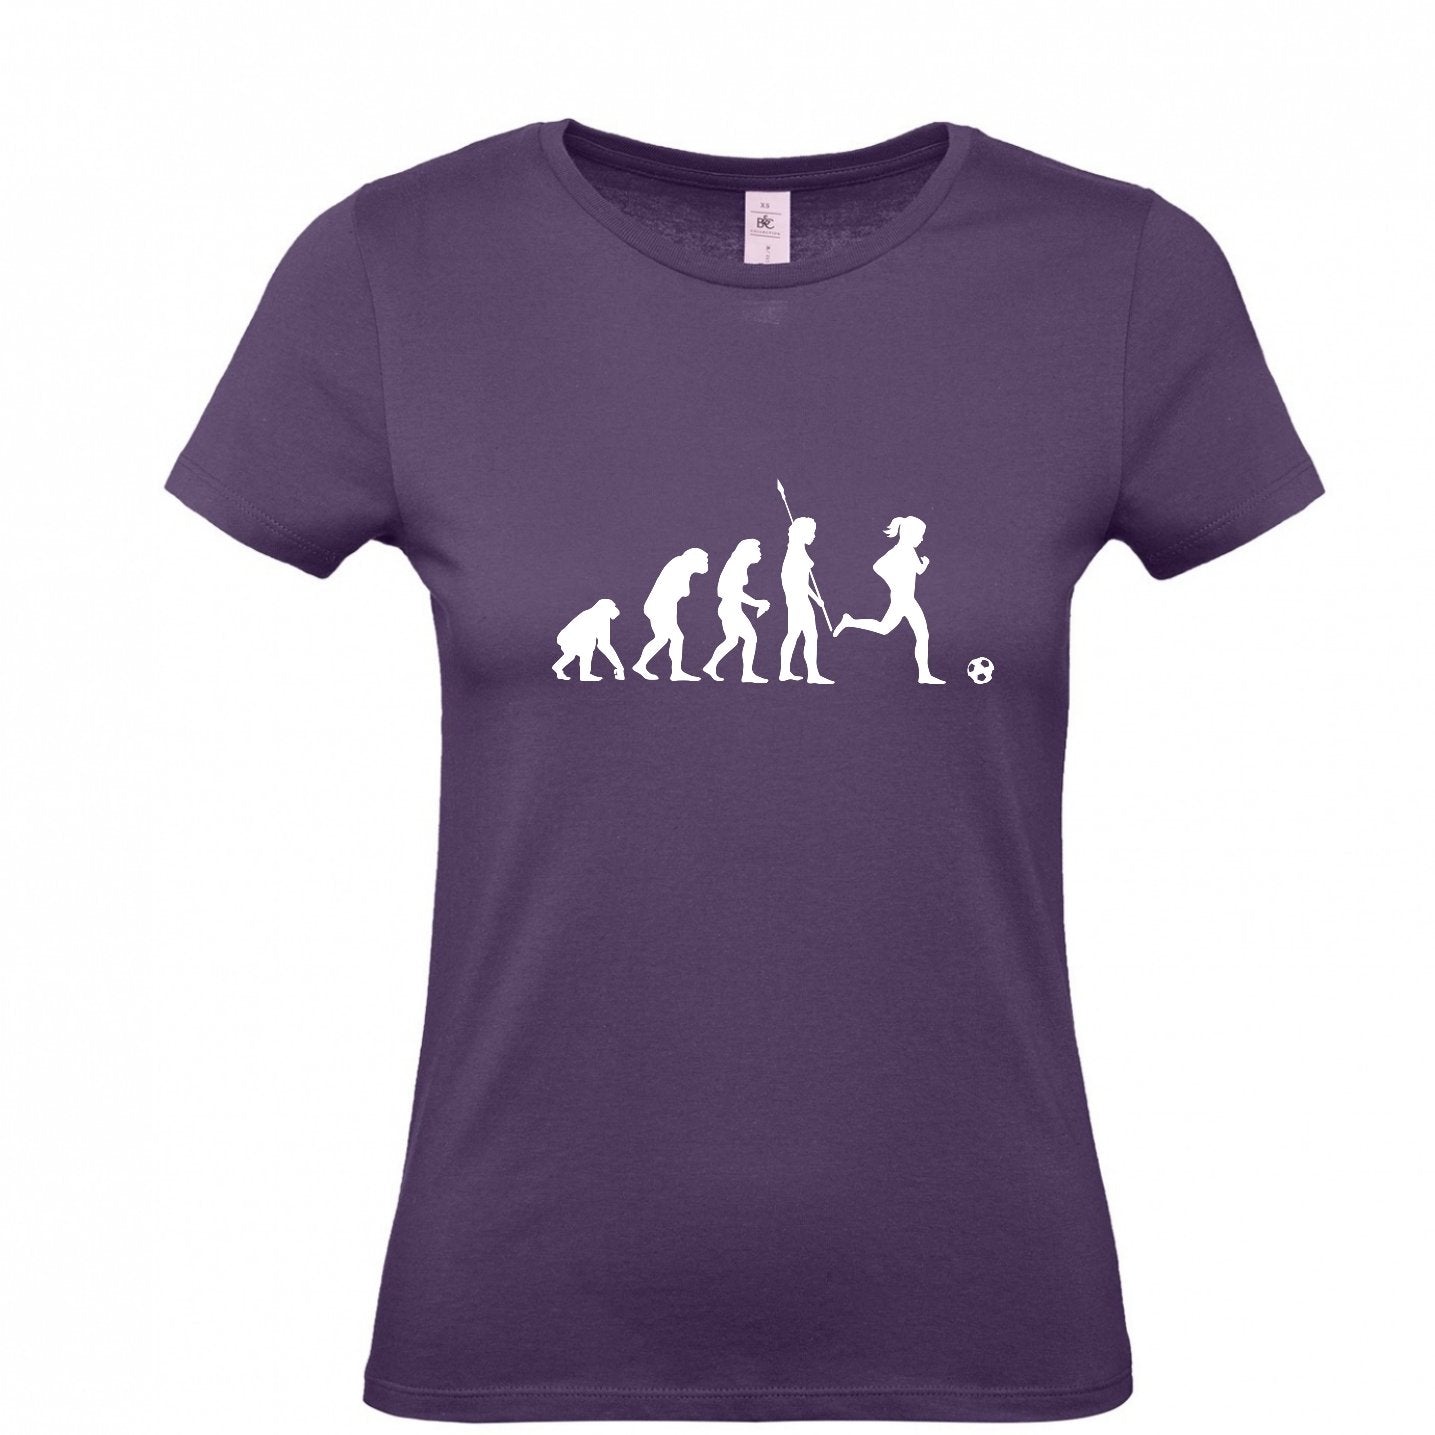 Evolution of Football T-Shirt for Teens/Adults - Scarf Monkey